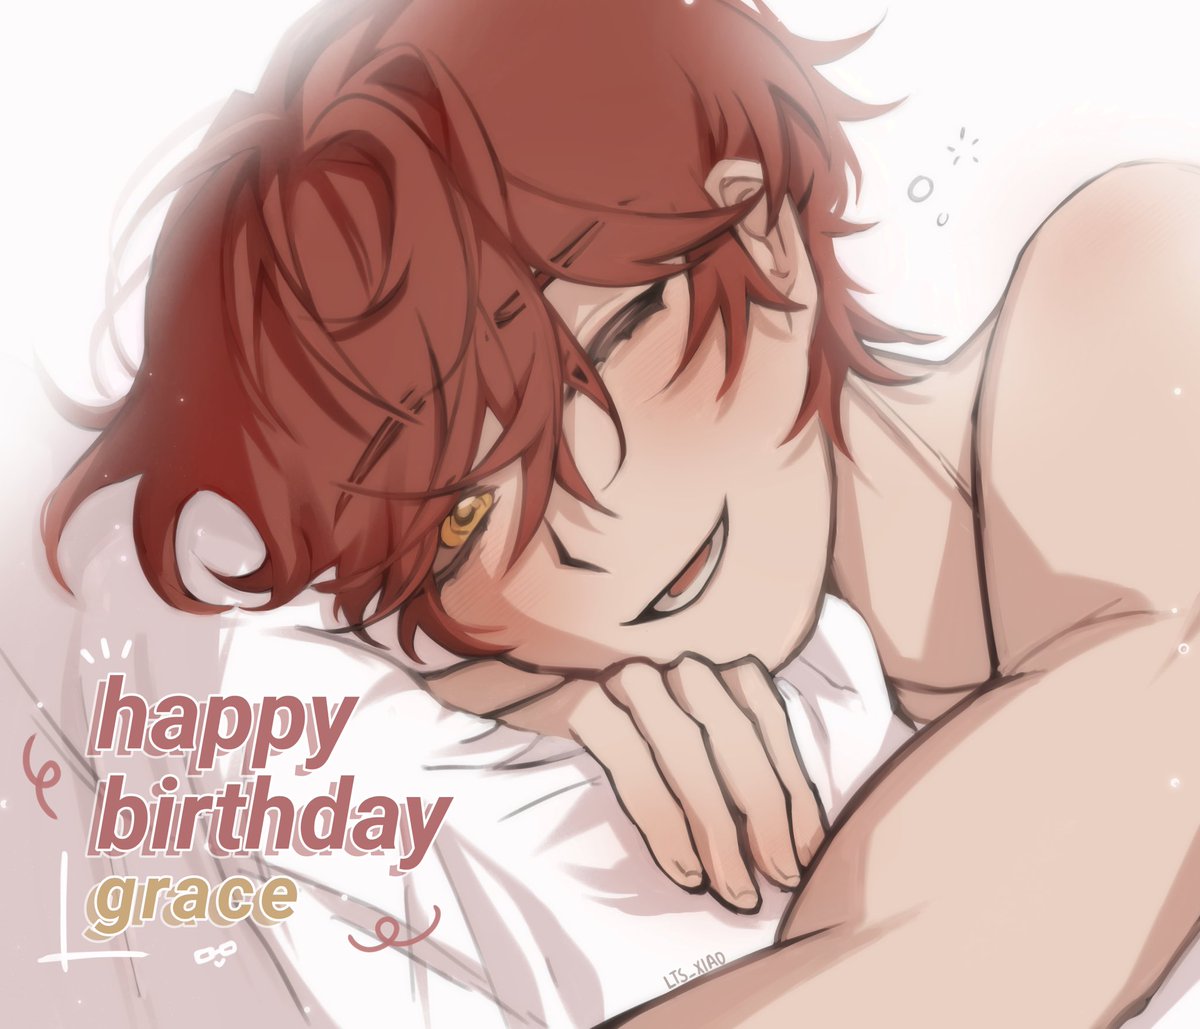 Happy (early?) birthday @707snun !

#saeyoung #choisaeyoung #mysticmessenger